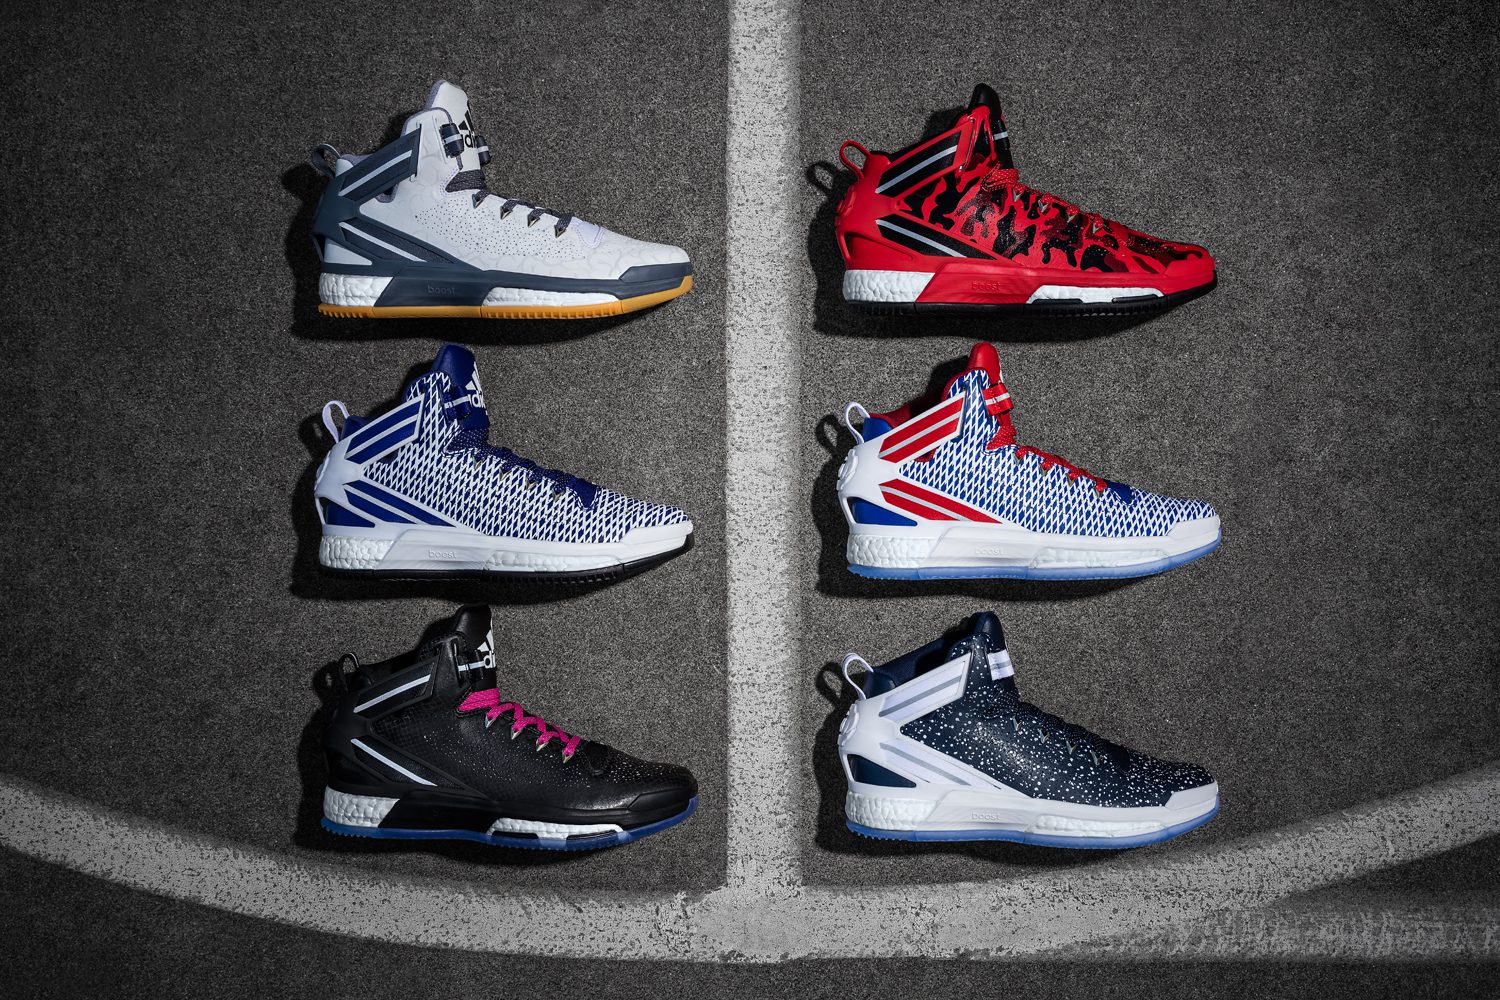 adidas D Rose 6 miadidas gives fans a say on new shoe - Hardwood and Hollywood